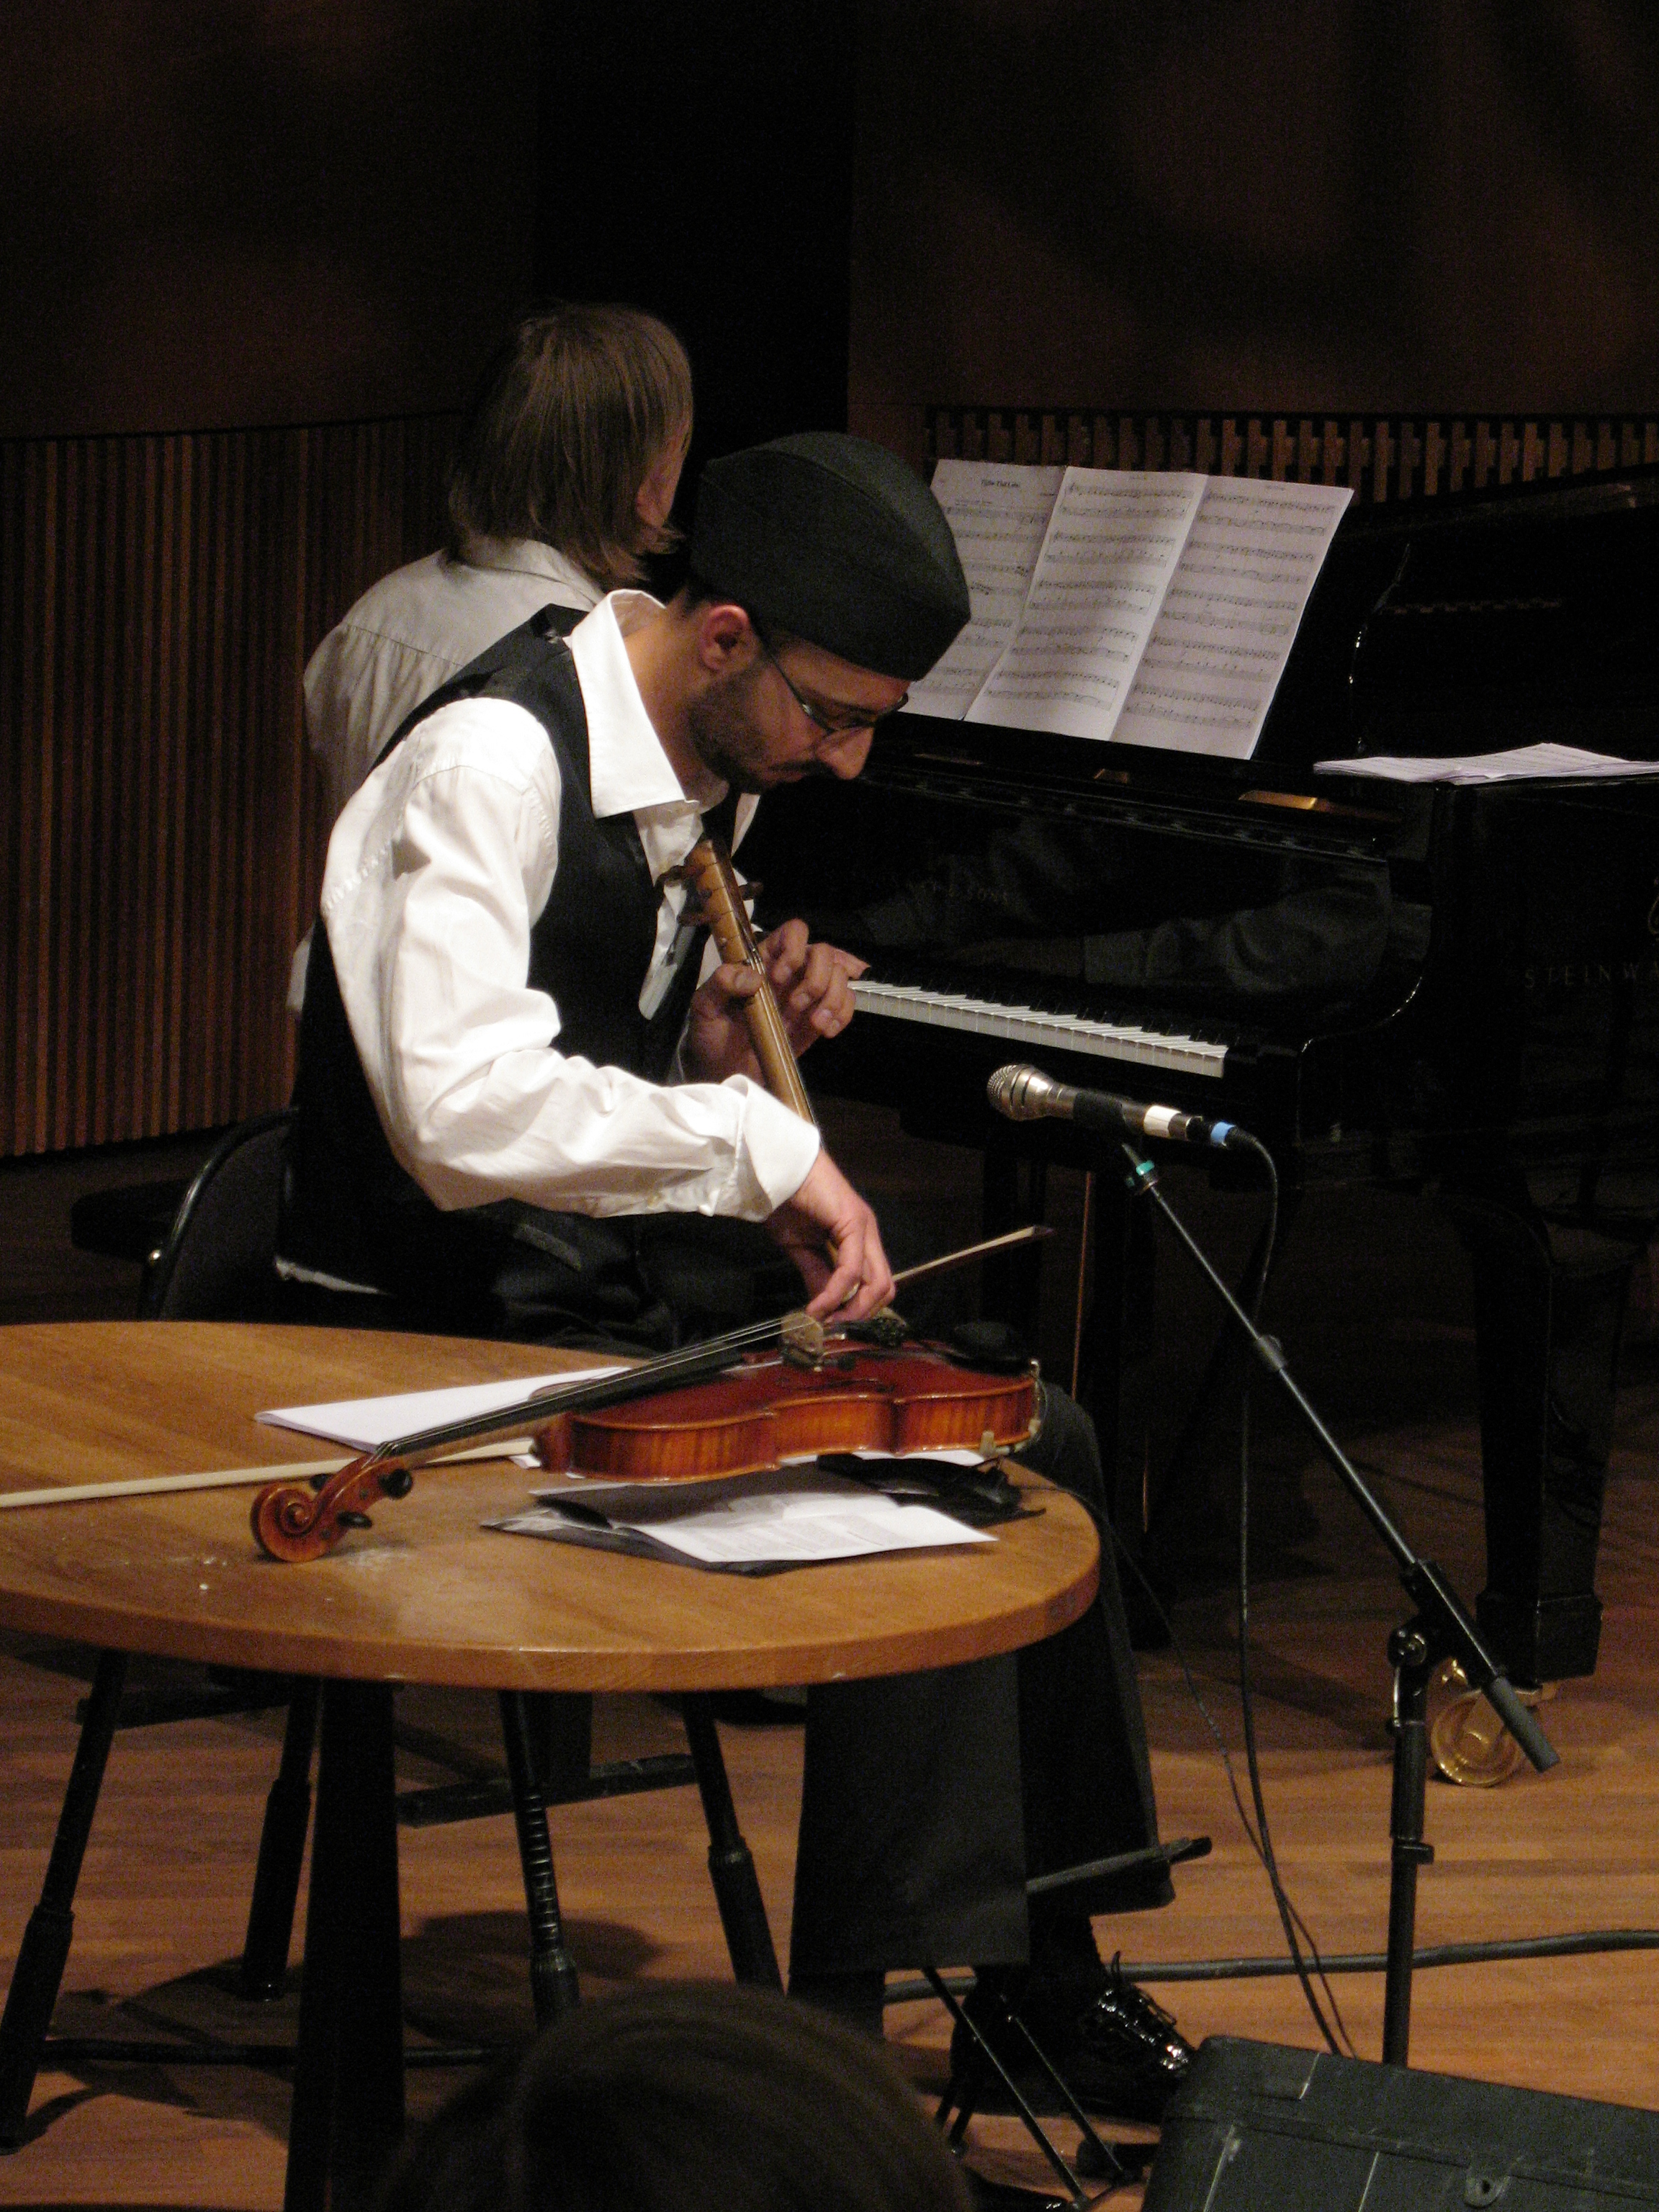 Pictures from the examination concert 048.jpg